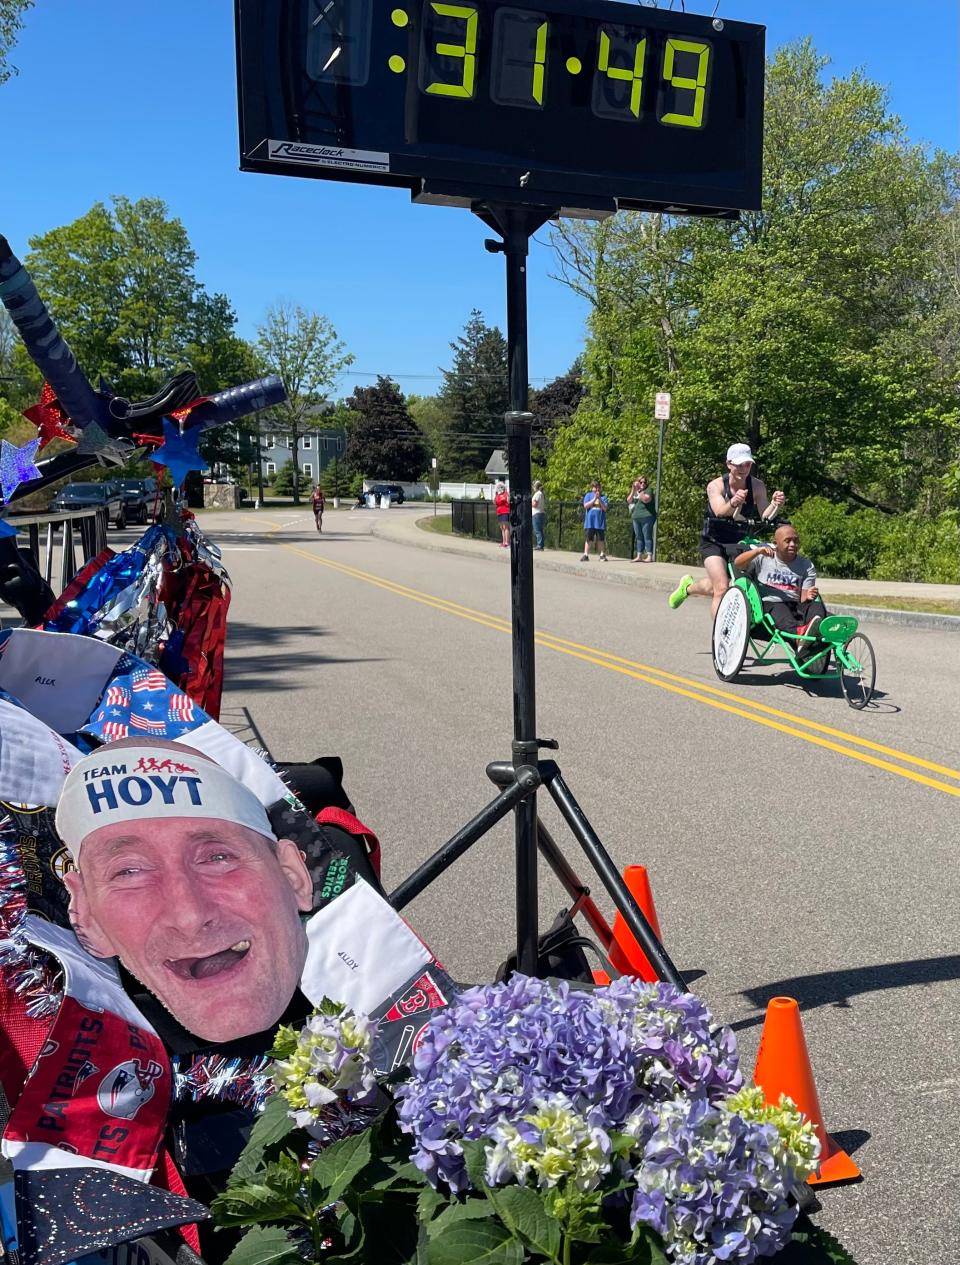 Brendan Aylward pushing Jacob Wyman cross as the first ‘duo’ finishers at the inaugural Dick Hoyt Memorial Yes You Can Race in Hopkinton on Saturday.